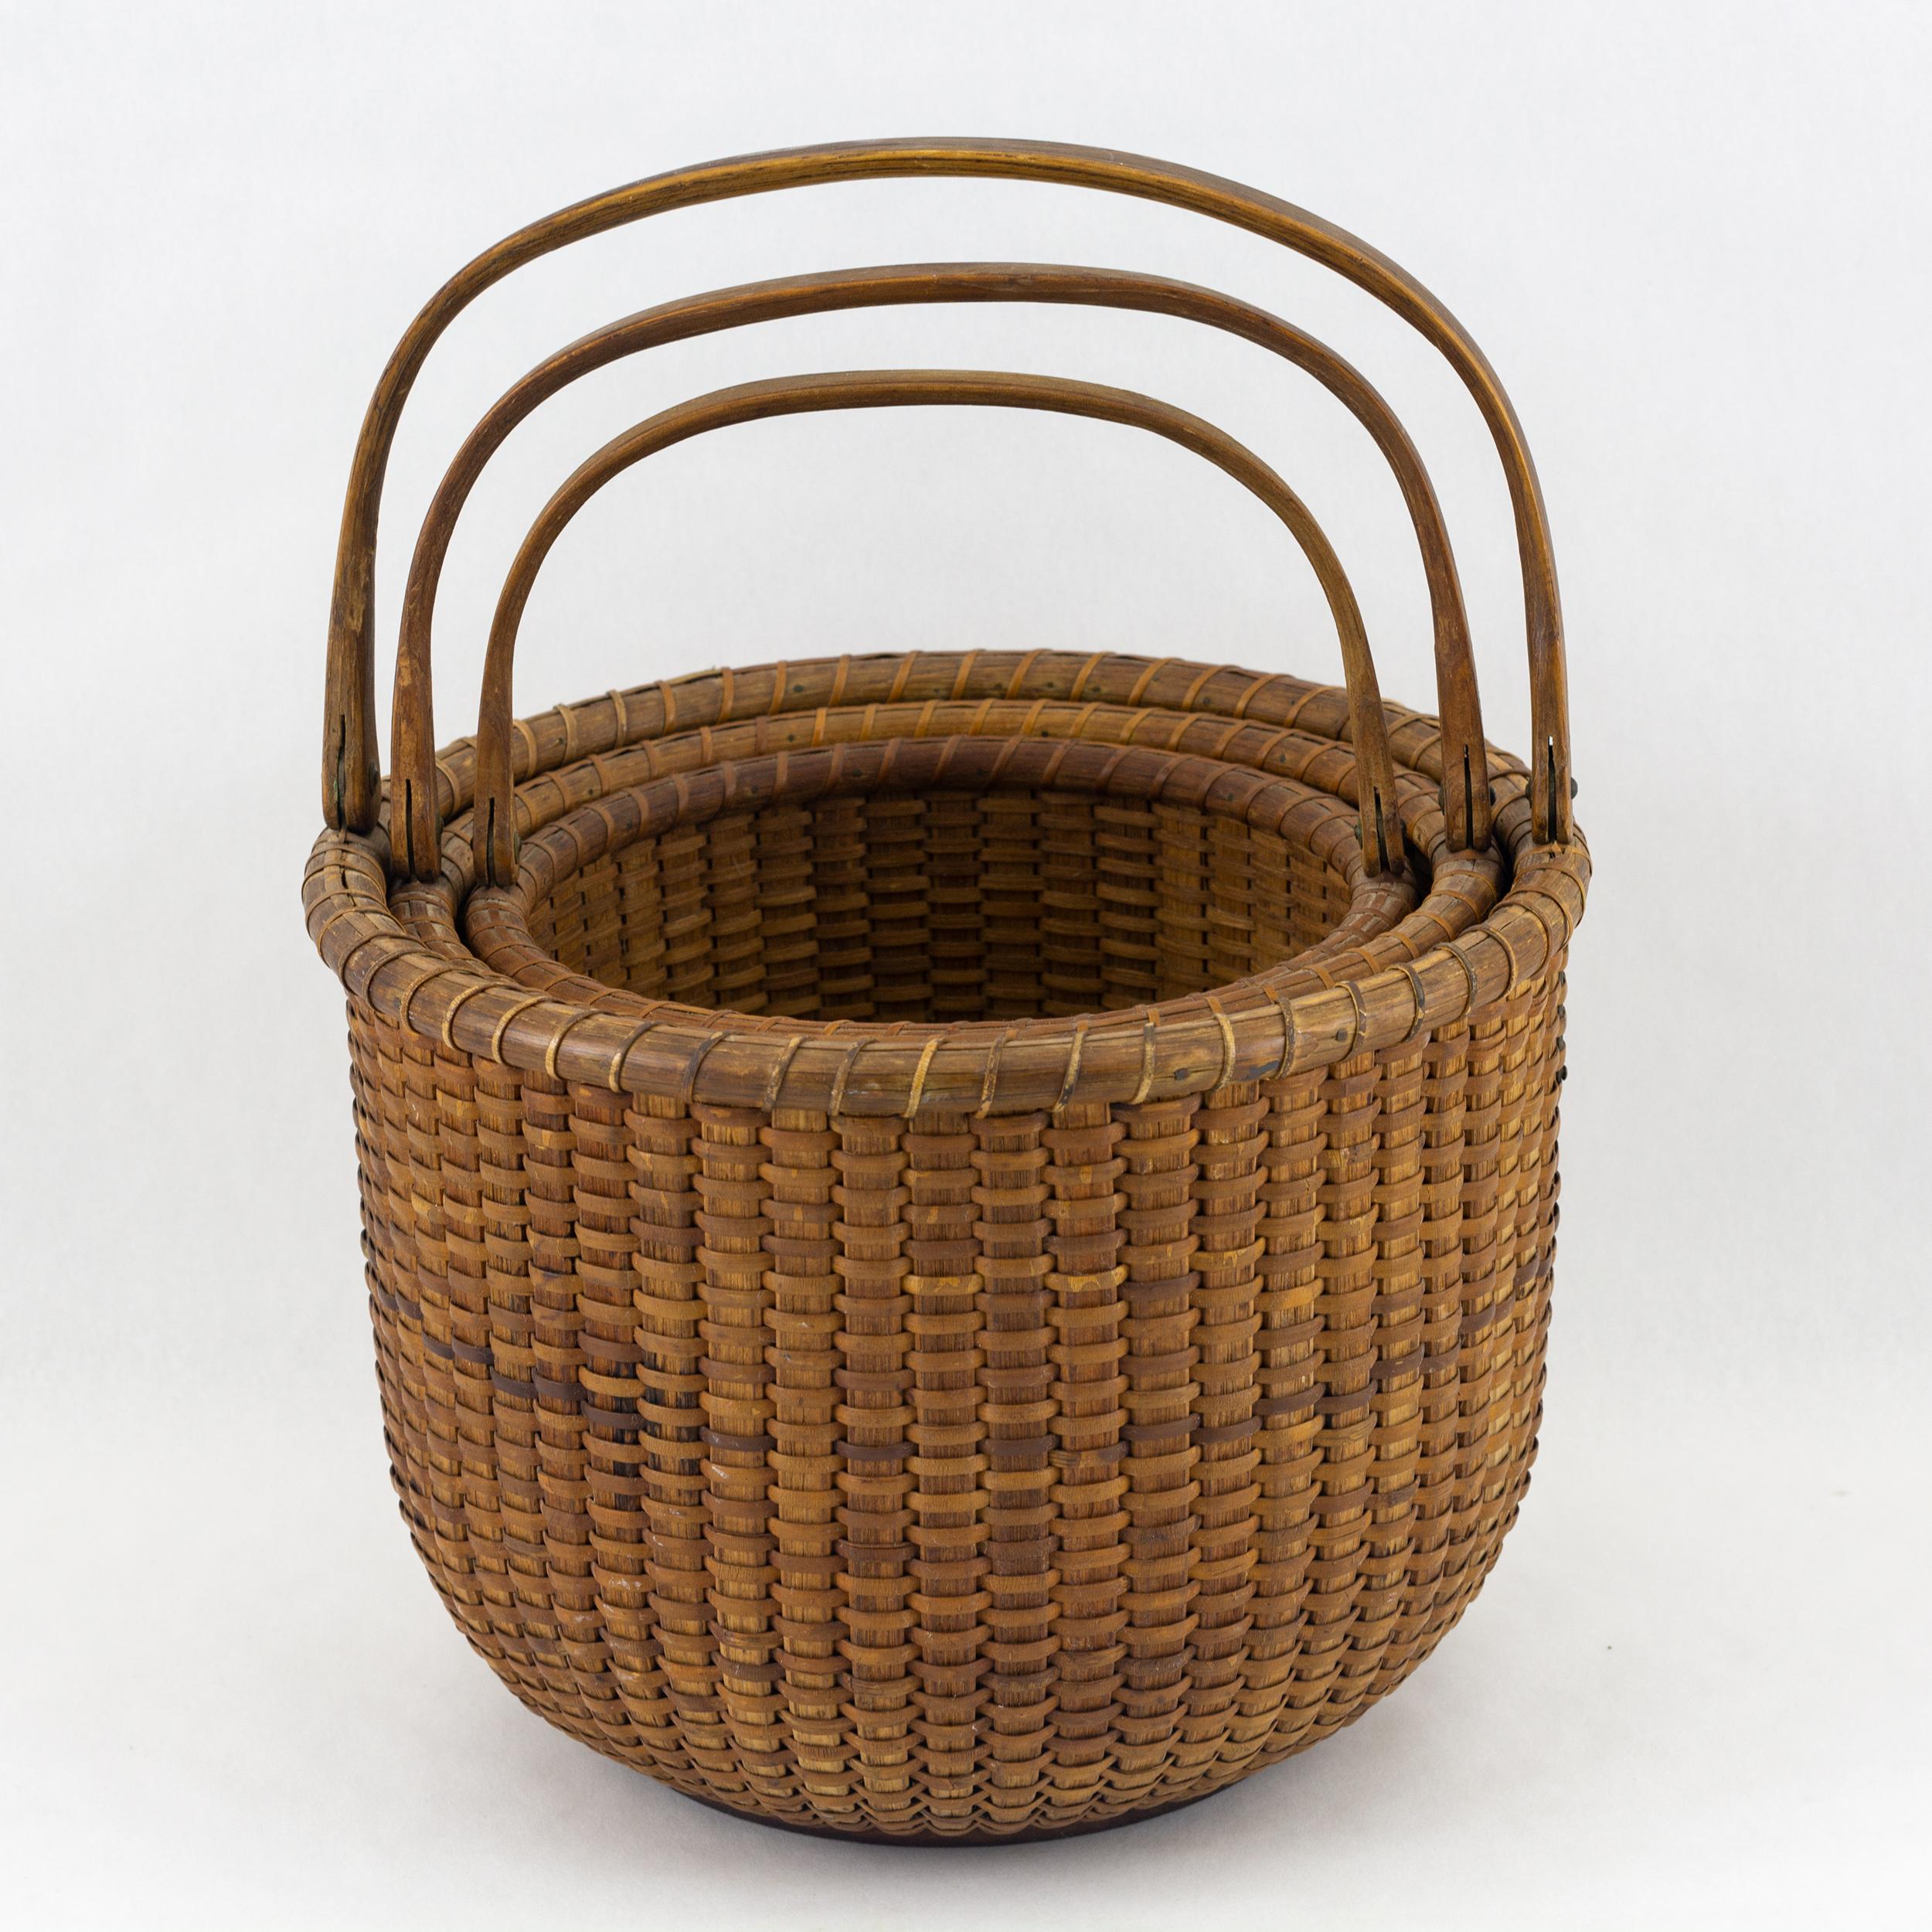 Three woven Nantucket lightship baskets, more than likely part of a larger nesting set.
Attributed to Captain Andrew J. Sandsbury (1830-1902). All three baskets are in original condition and showing there dark rich patina. The largest is 8